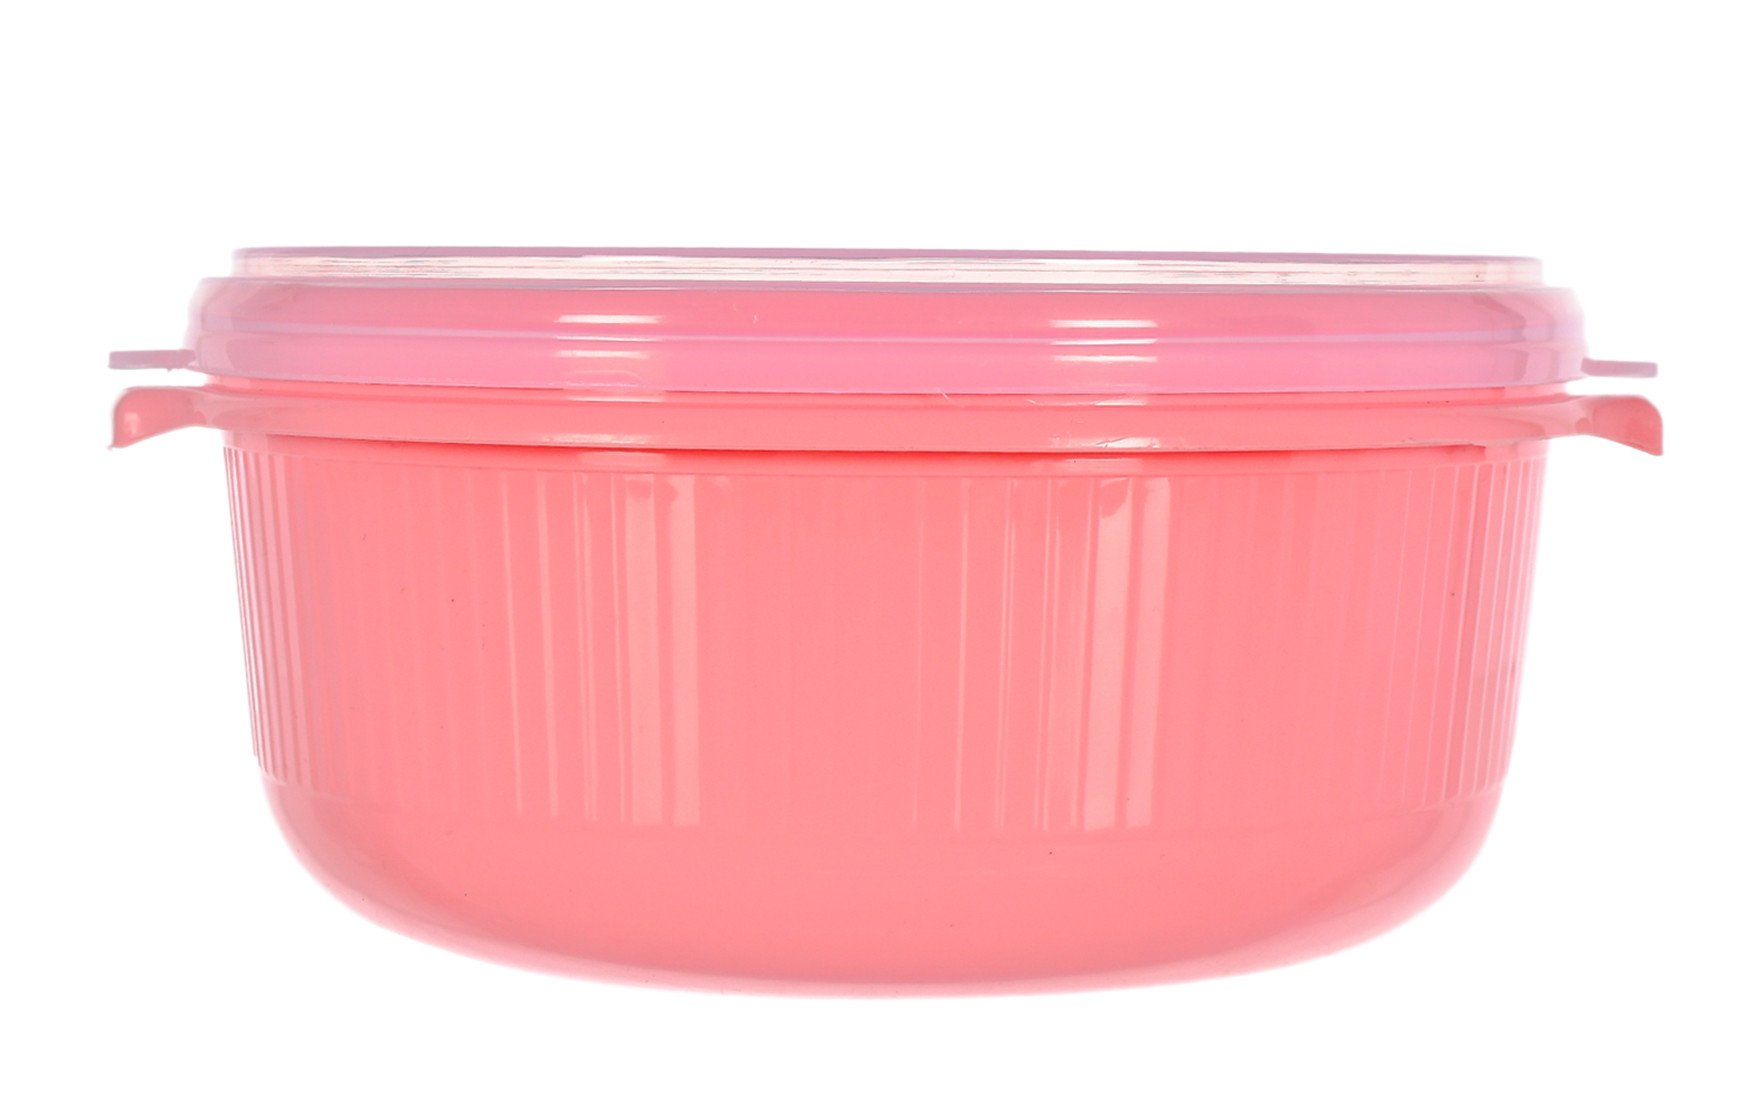 Kuber Industries 3 Piece Multiuses Plastic Serving/Mixing Bowls, Food Storage Containers Set With Lid, (3200ml, 1800ml, 1000ml) (Pink)-46KM0319